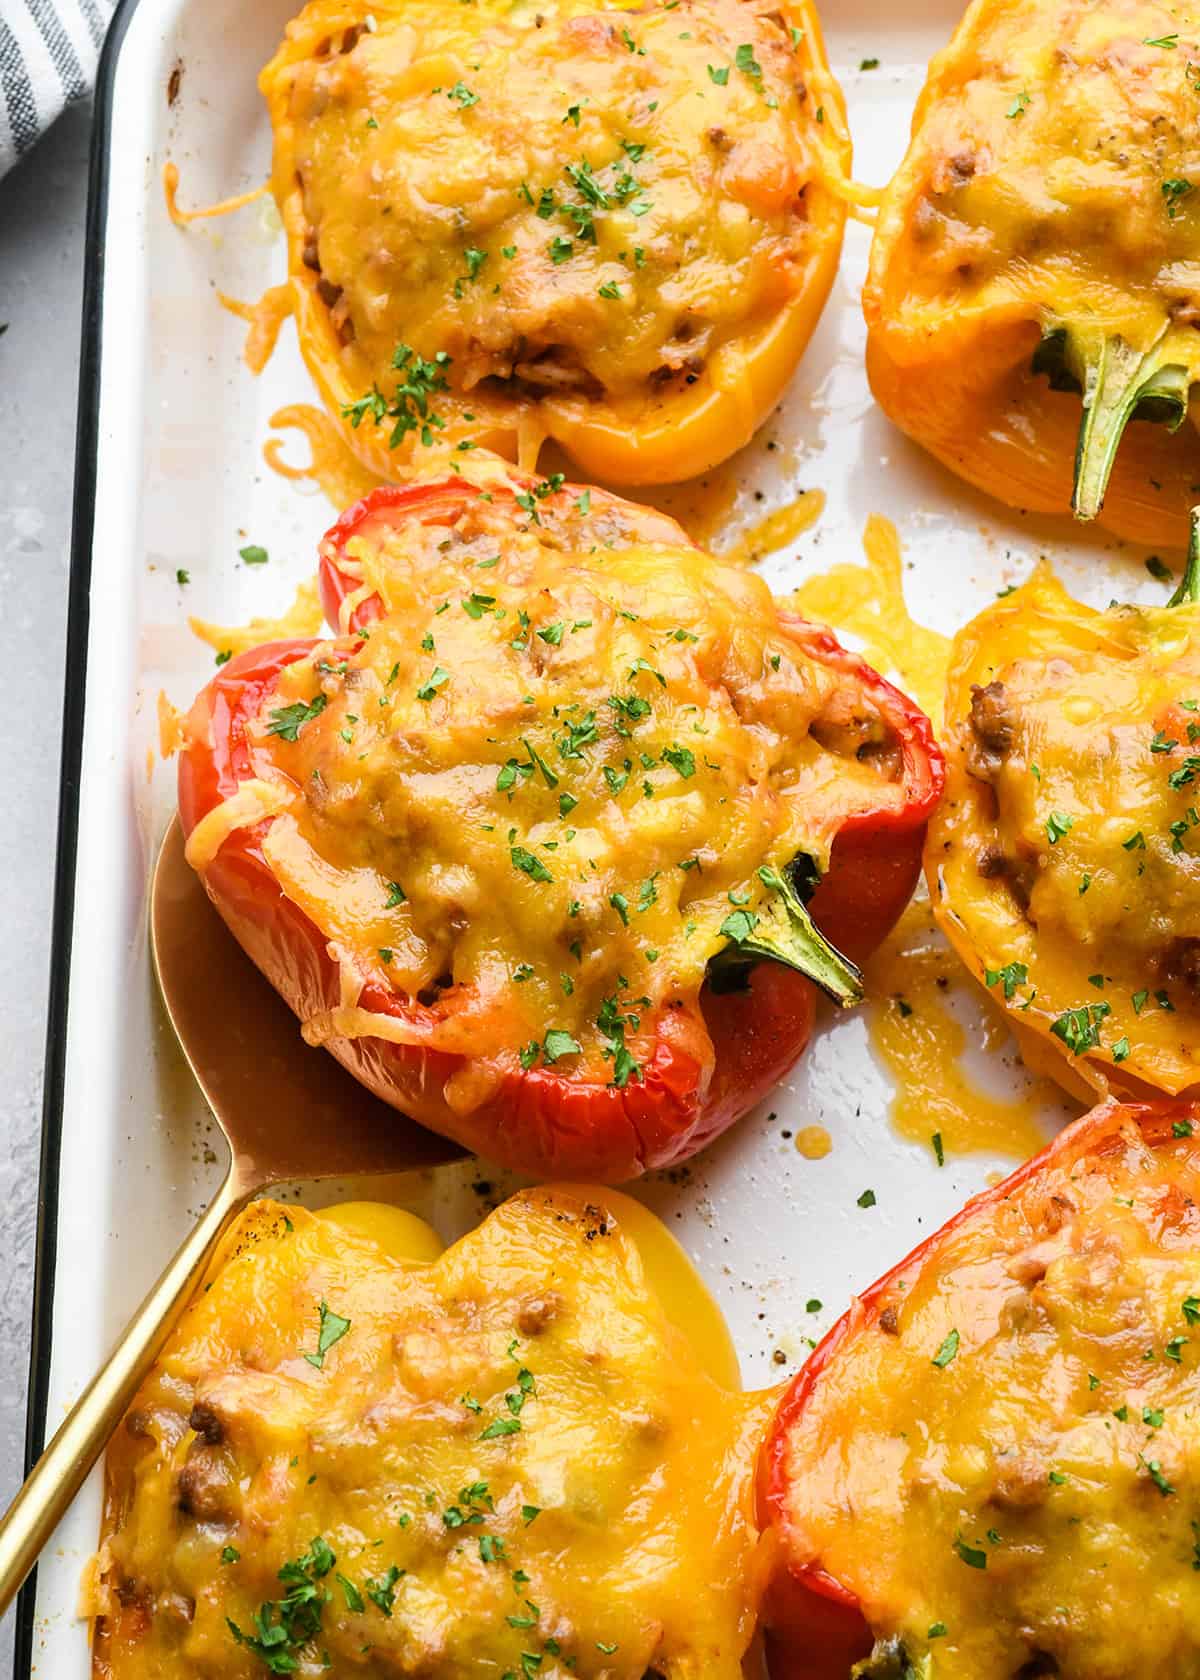 Stuffed Peppers after baking garnished with parsley on a baking sheet